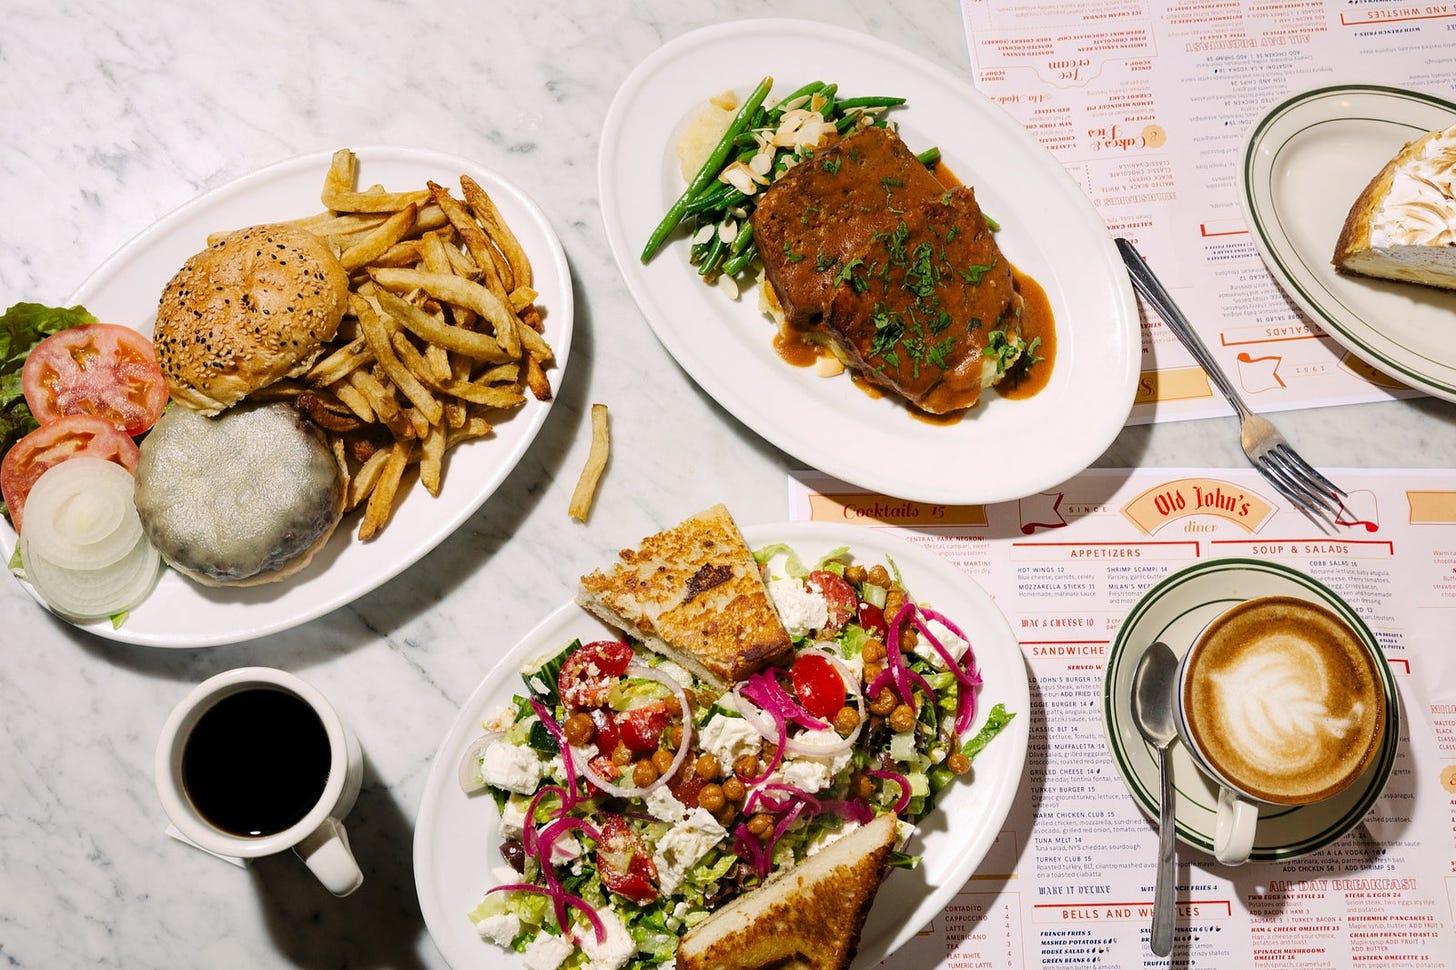 A table of dishes at Old John's set atop the diner's menus.